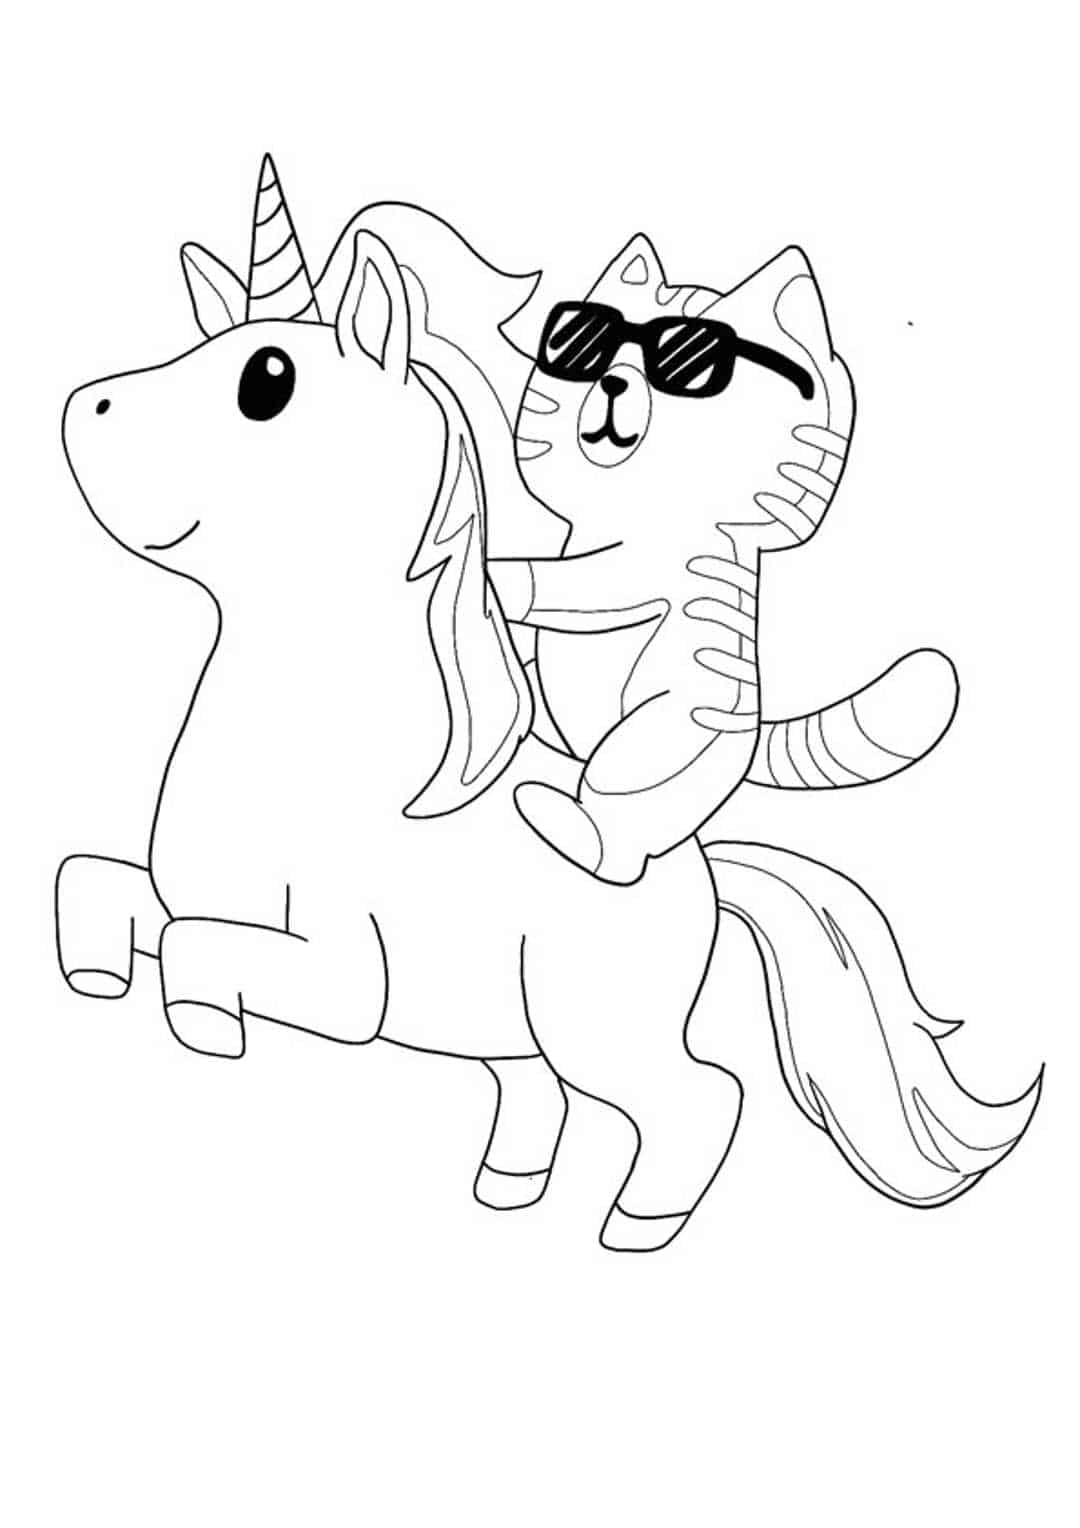 Cat Riding Unicorn Coloring Page